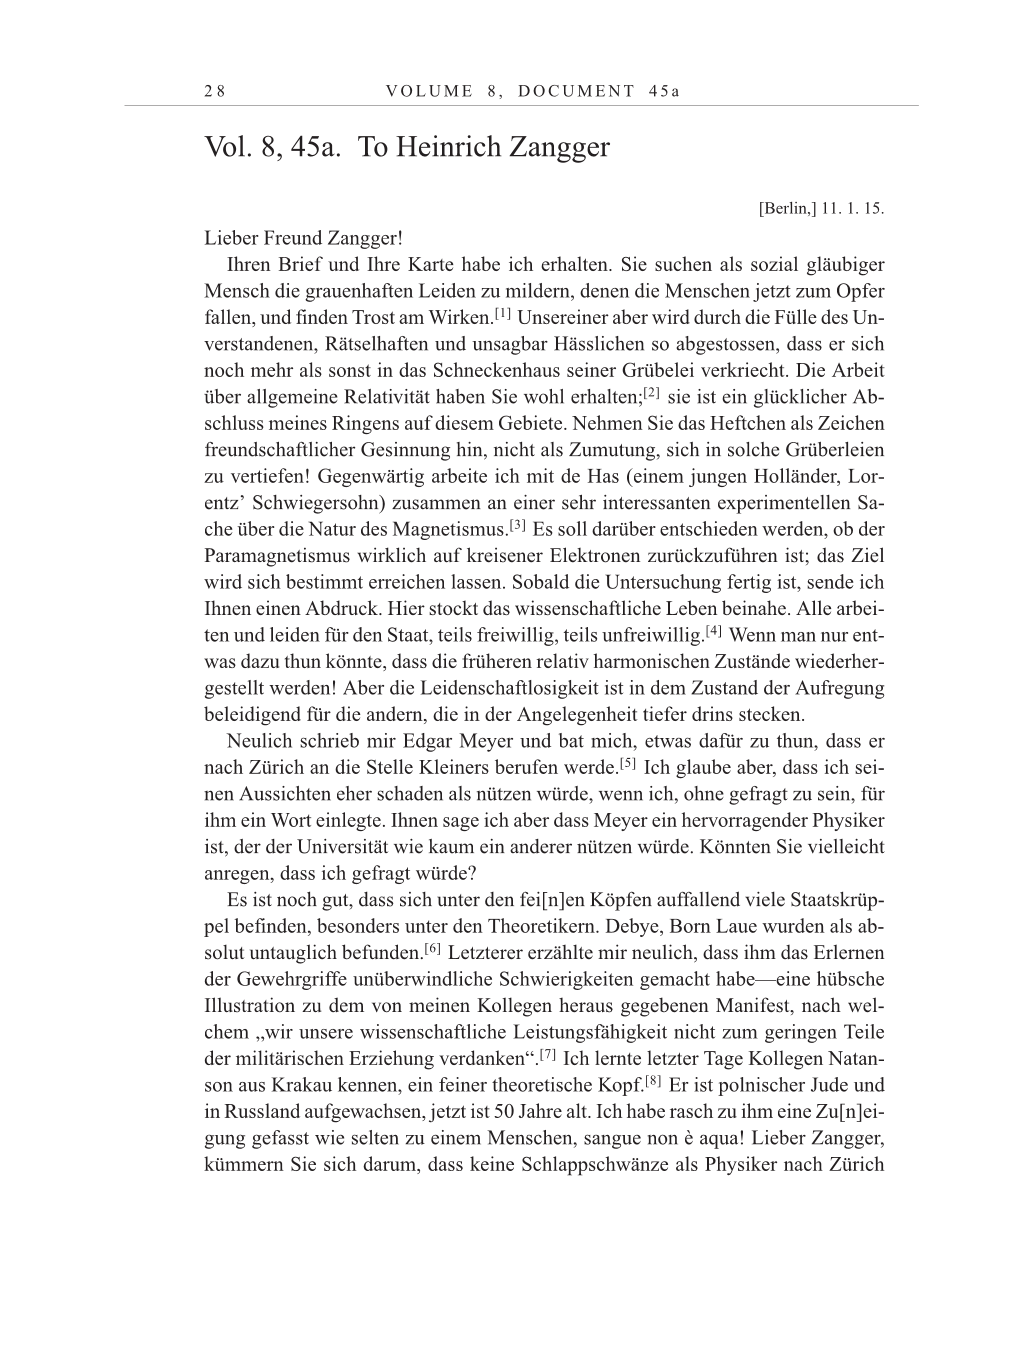 Volume 10: The Berlin Years: Correspondence May-December 1920 / Supplementary Correspondence 1909-1920 page 28